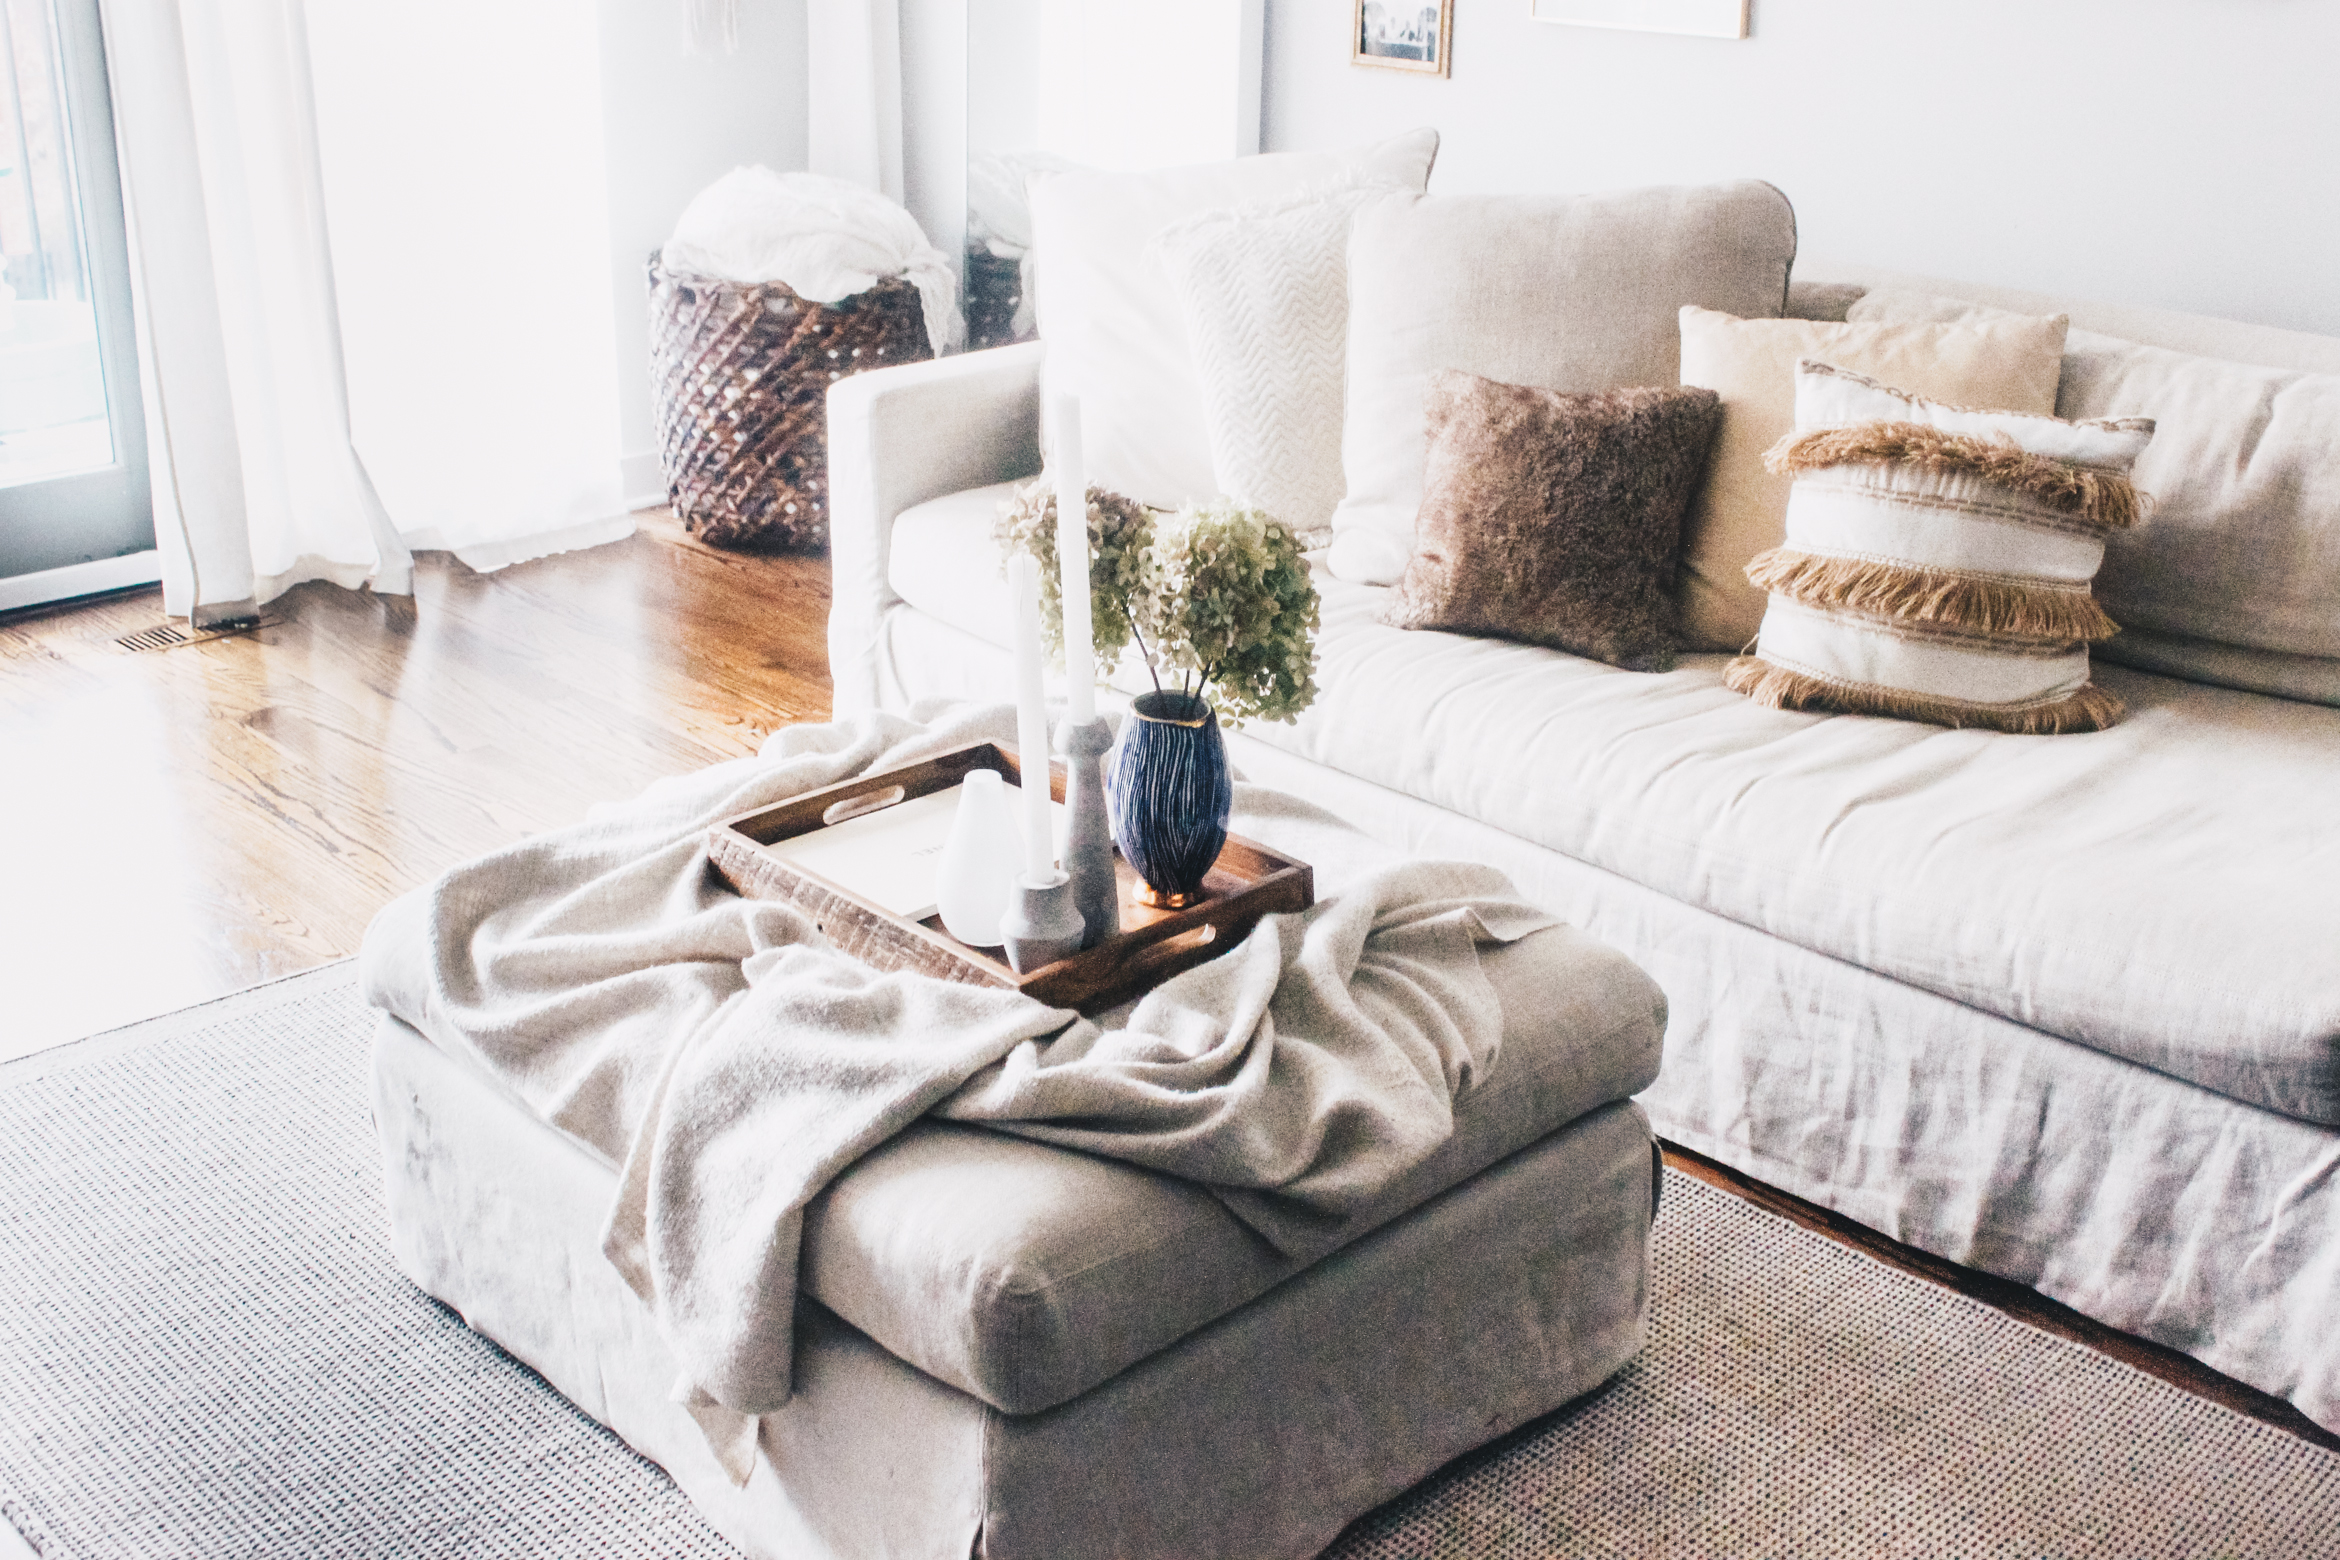 8 easy ways to revamp your living room on a budget – Meg McMillin